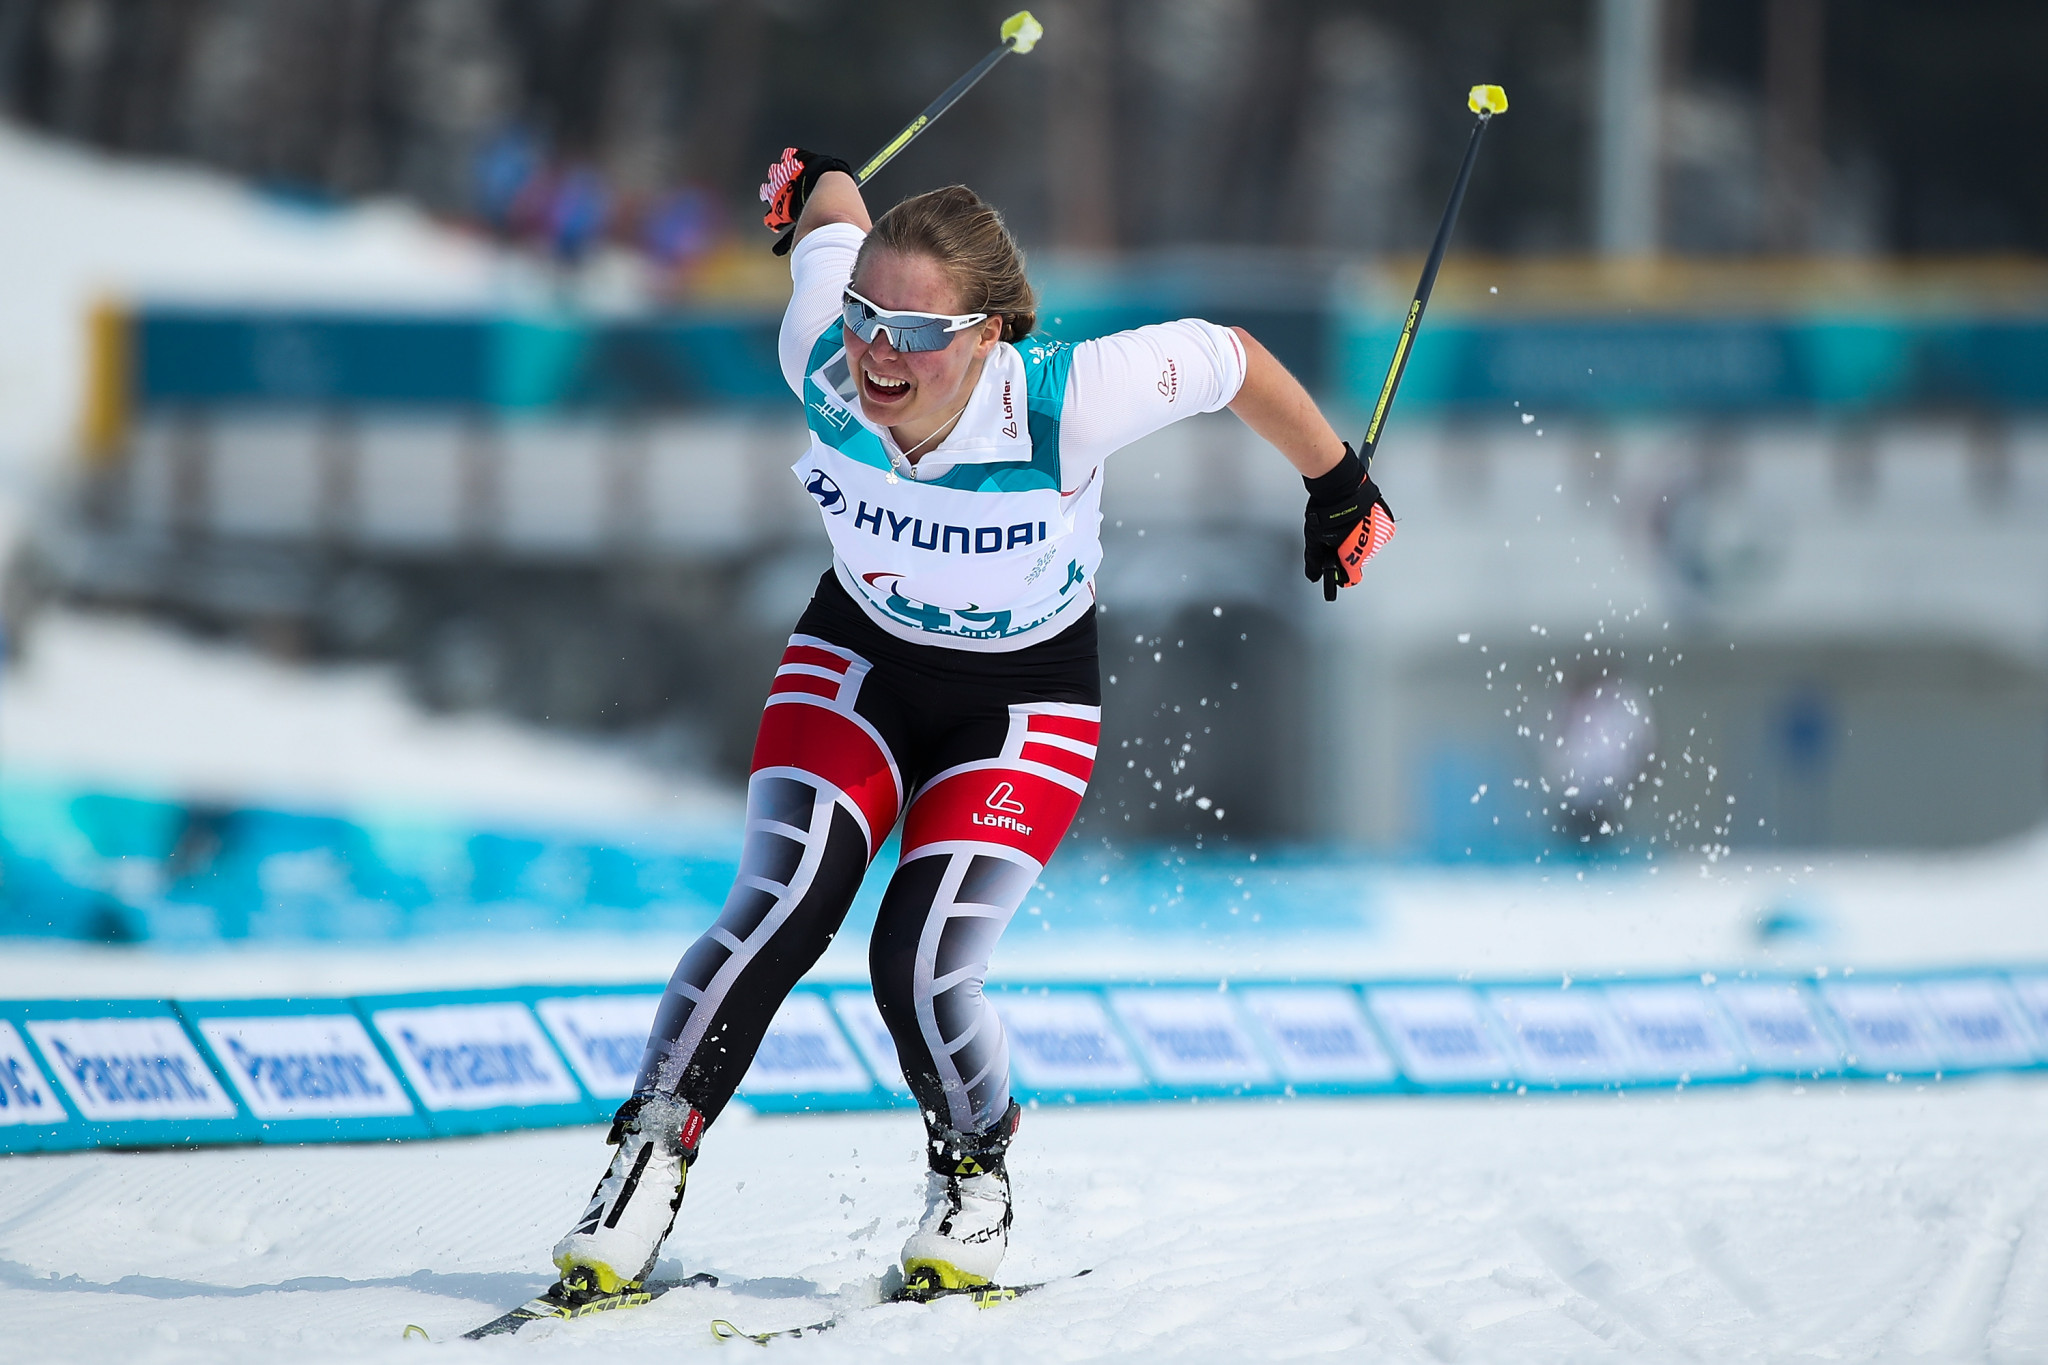 Austria's Carina Edlinger won the women's visually impaired middle distance cross-country event at the World Para Nordic Skiing World Cup event in Östersund ©Getty Images